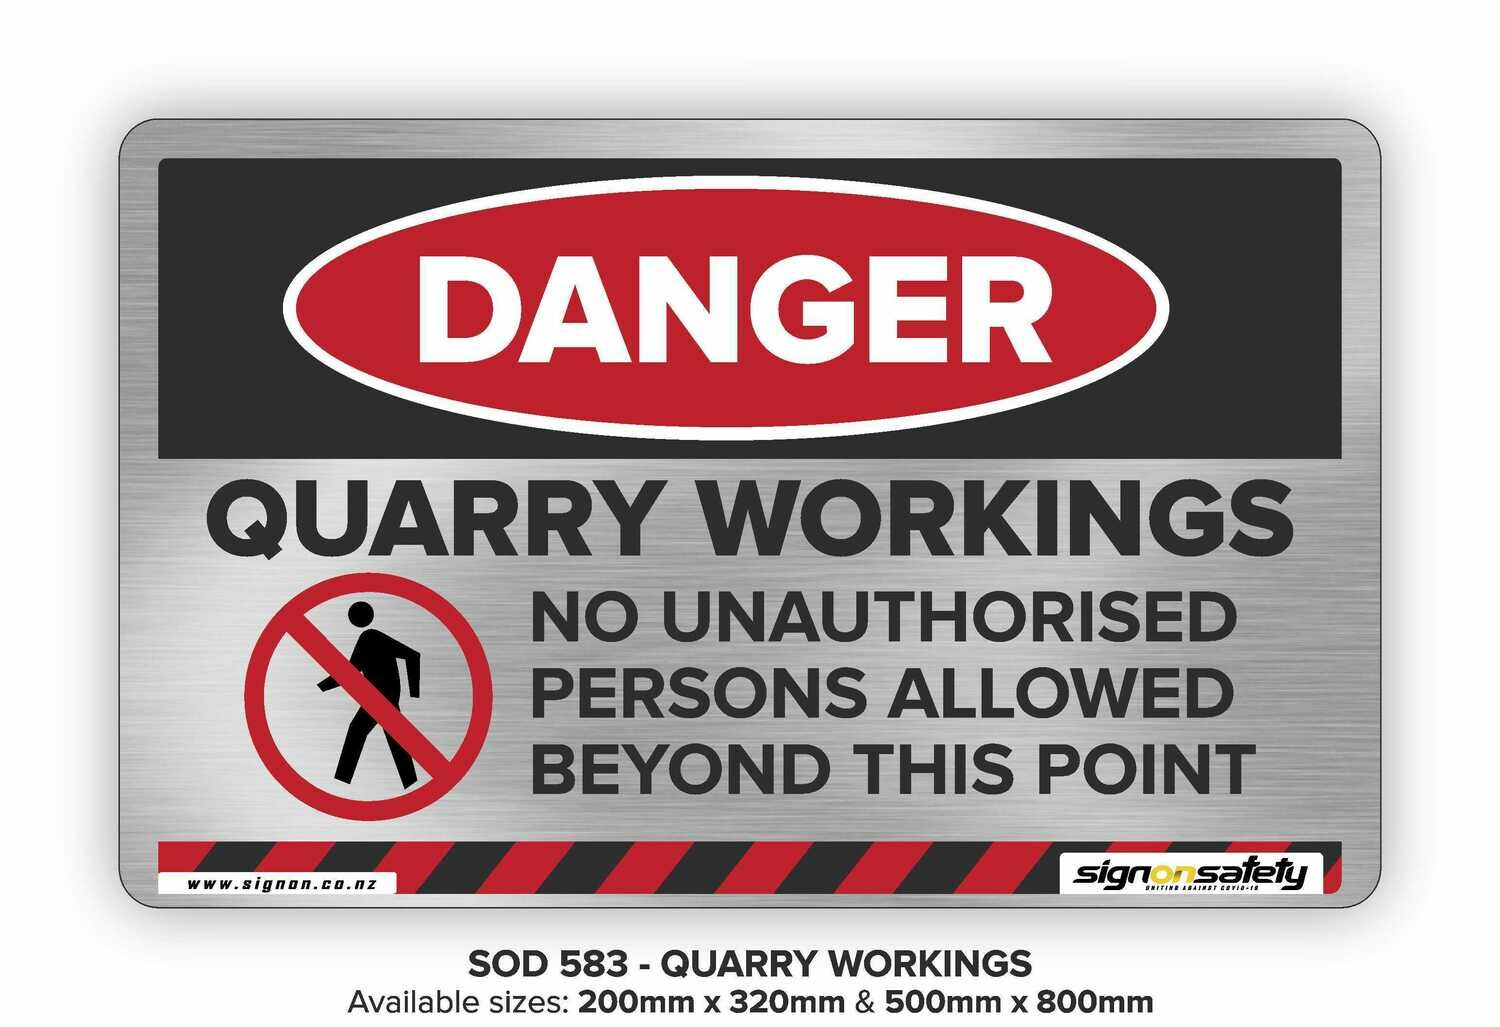 Danger - Quarry Workings No Authorised Persons